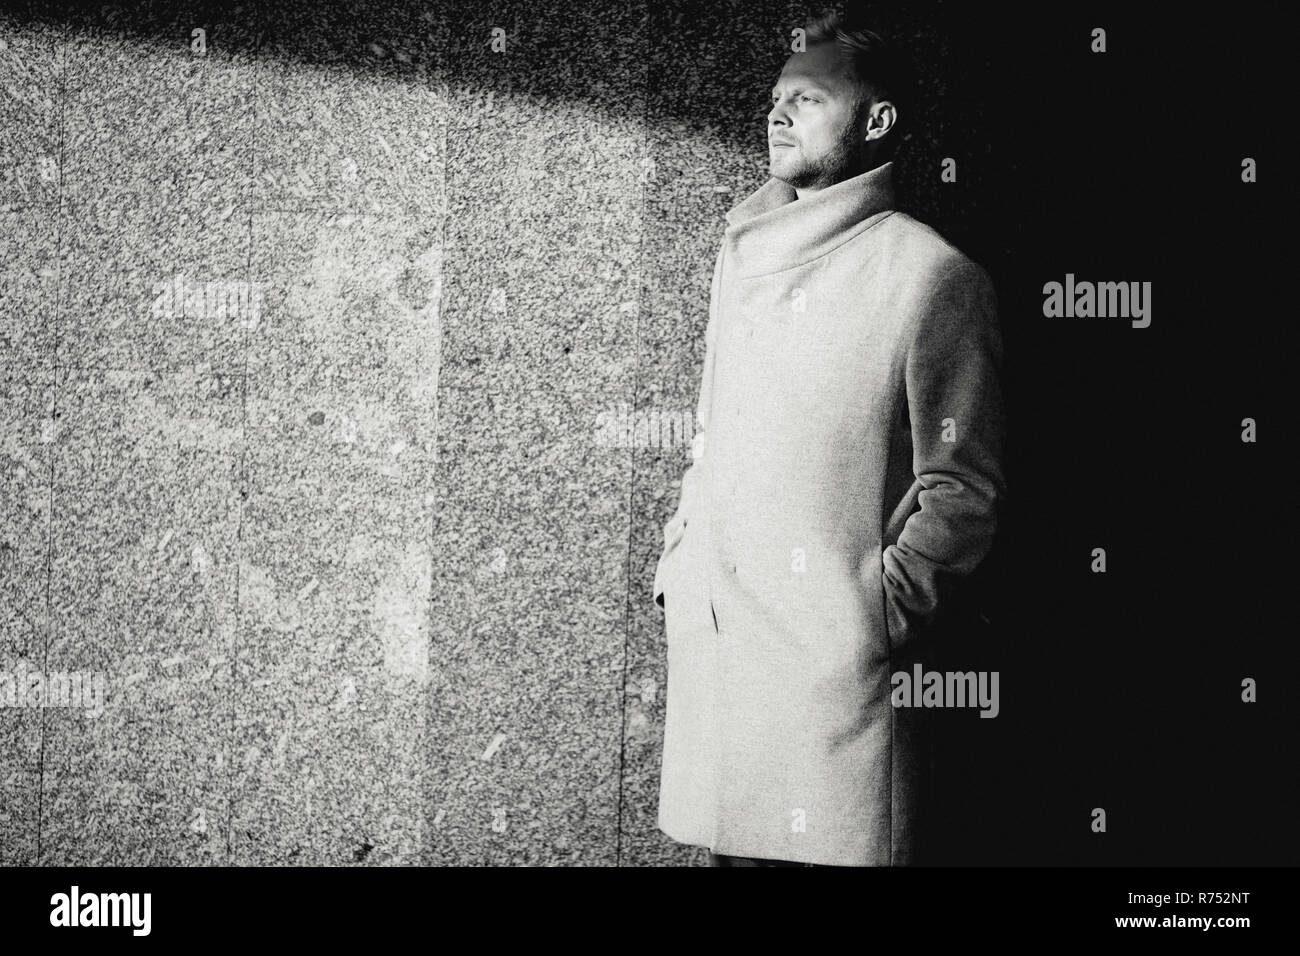 Black and white photo of man in coat walking near wall, defocused background. Stock Photo